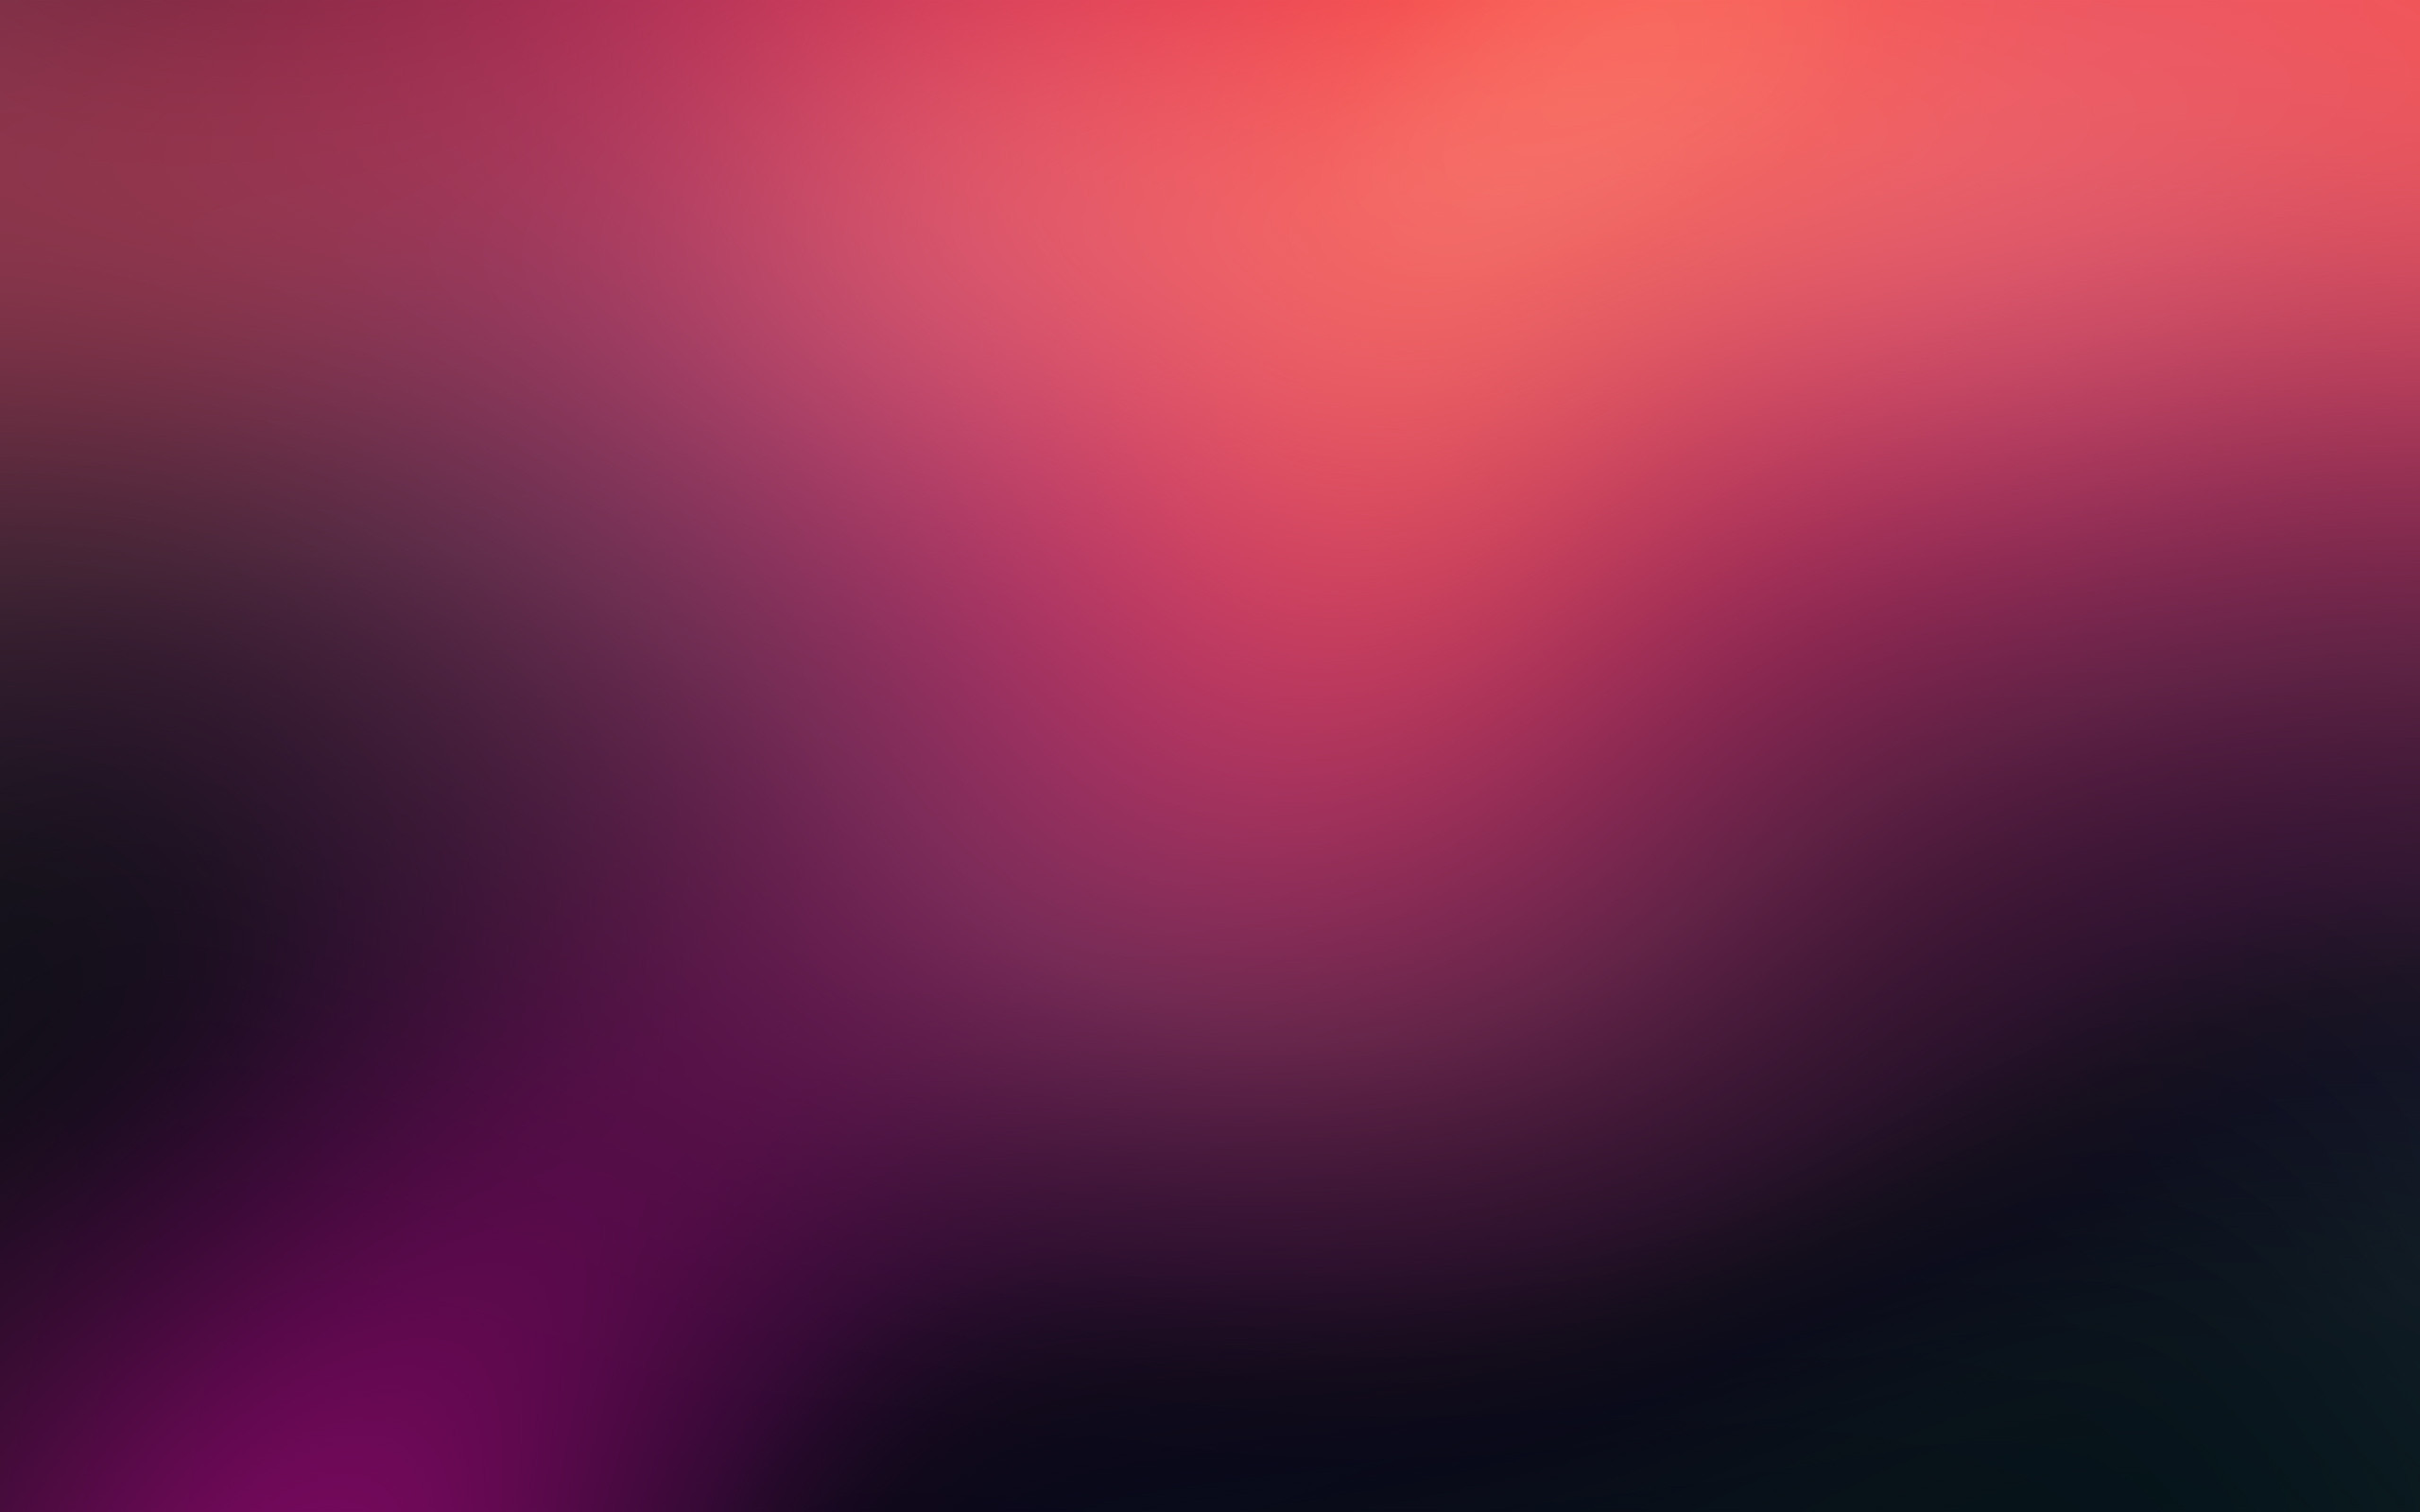 2560x1600 Blurred Red and Pink Â» Blurred Red and Pink